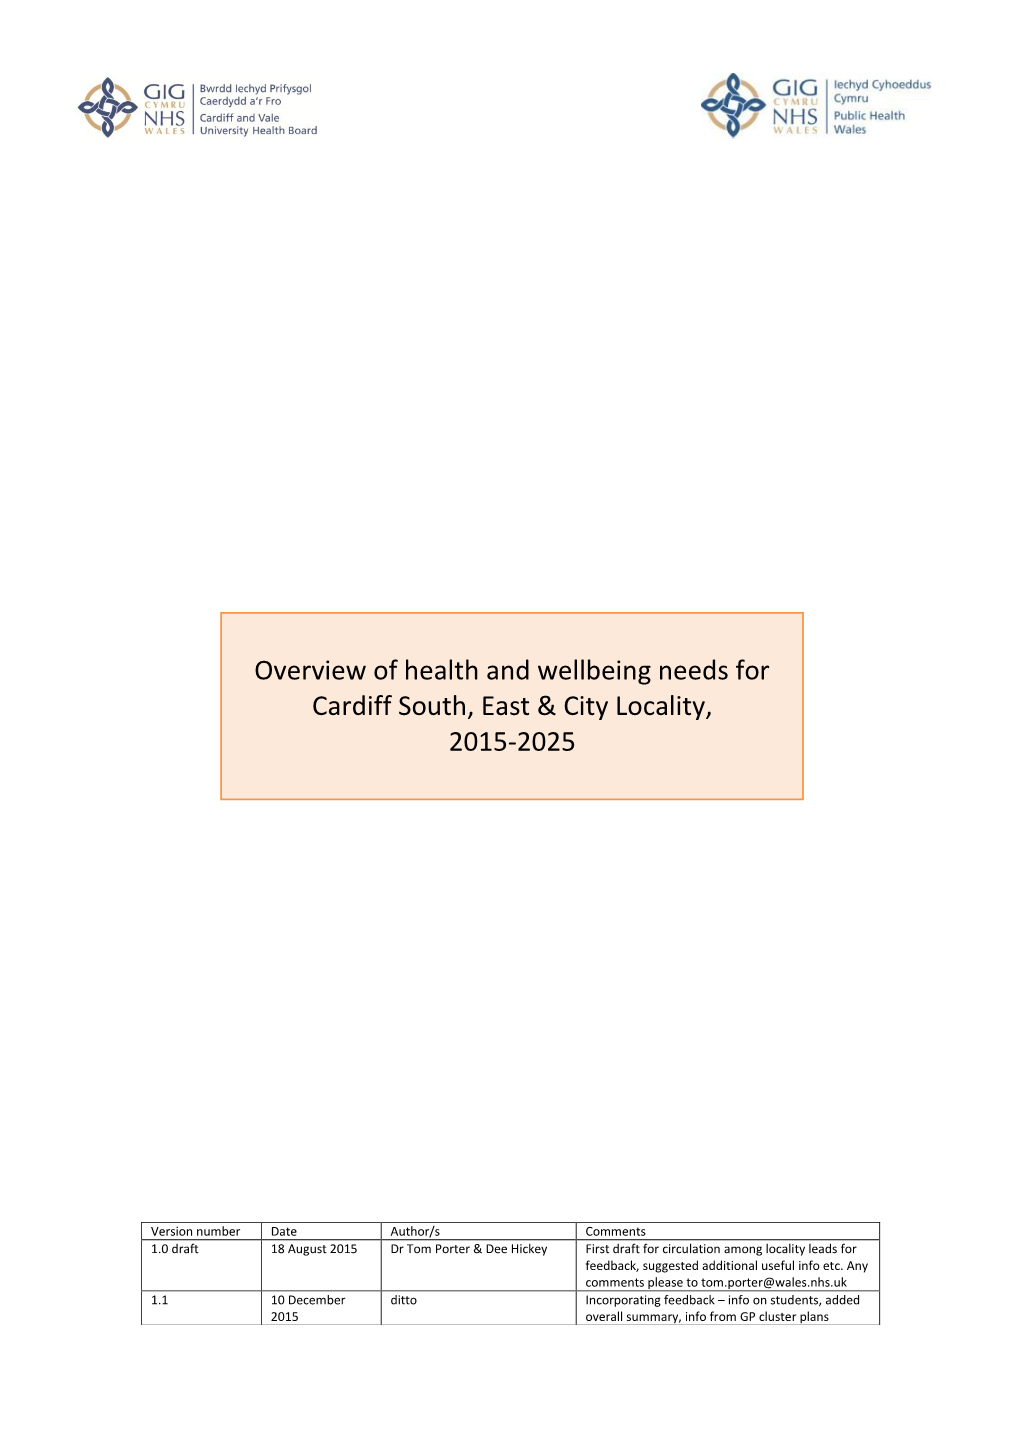 Cardiff South, East & City Locality Needs Assessment 2015-2025